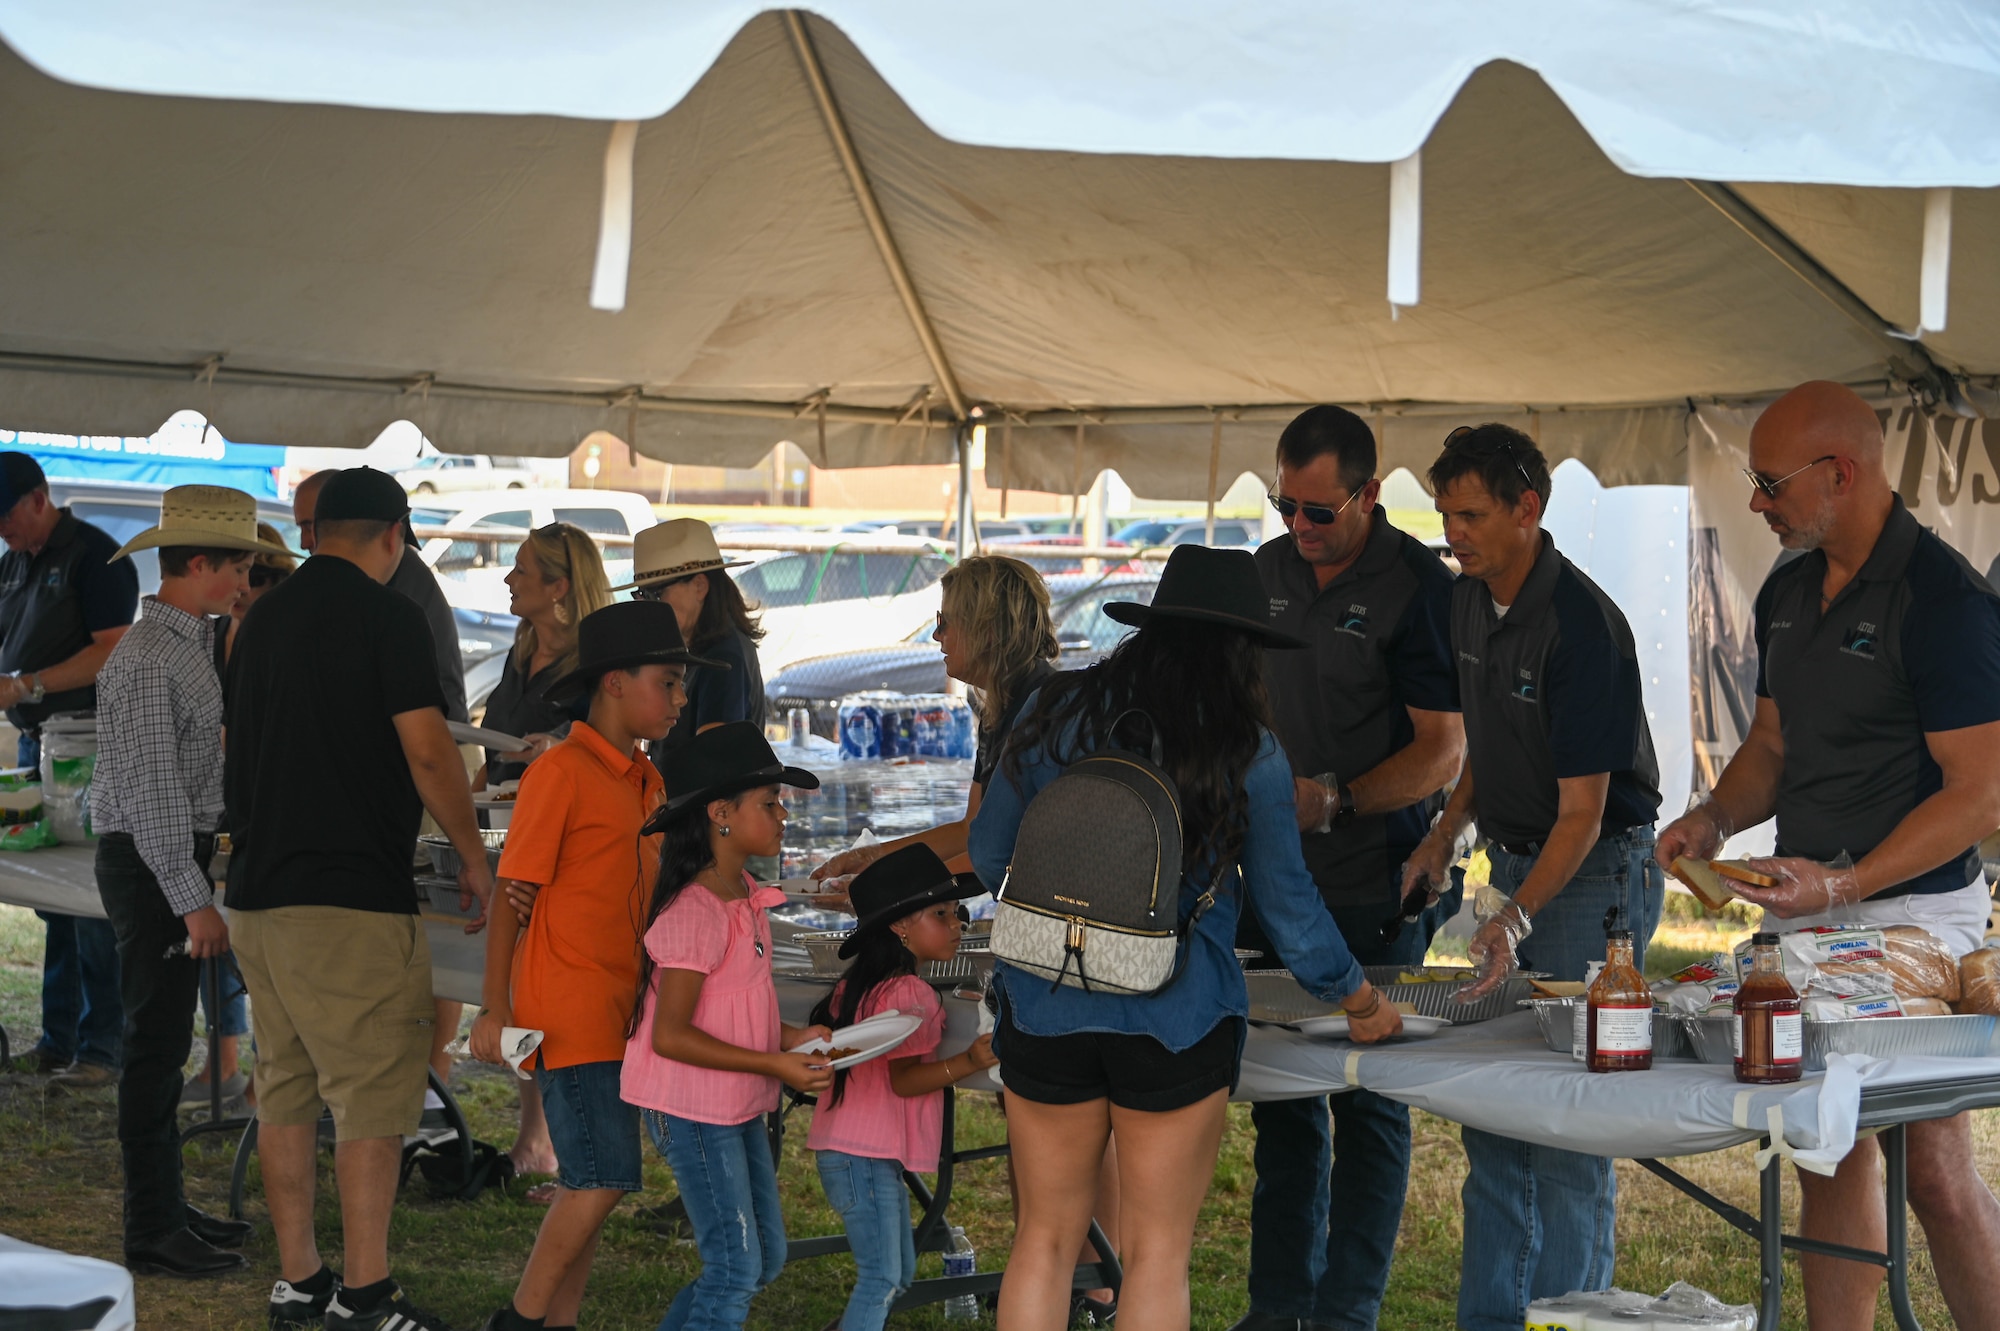 Members of the Altus Military Affairs Committee serve food to Airmen and their families during the Military Appreciation Night dinner at the Great Plains Stampede Rodeo in Altus, Oklahoma, Aug. 24, 2023. The dinner was held to show appreciation for the Airmen’s dedication and service. (U.S. Air Force photo by Airman 1st Class Heidi Bucins)